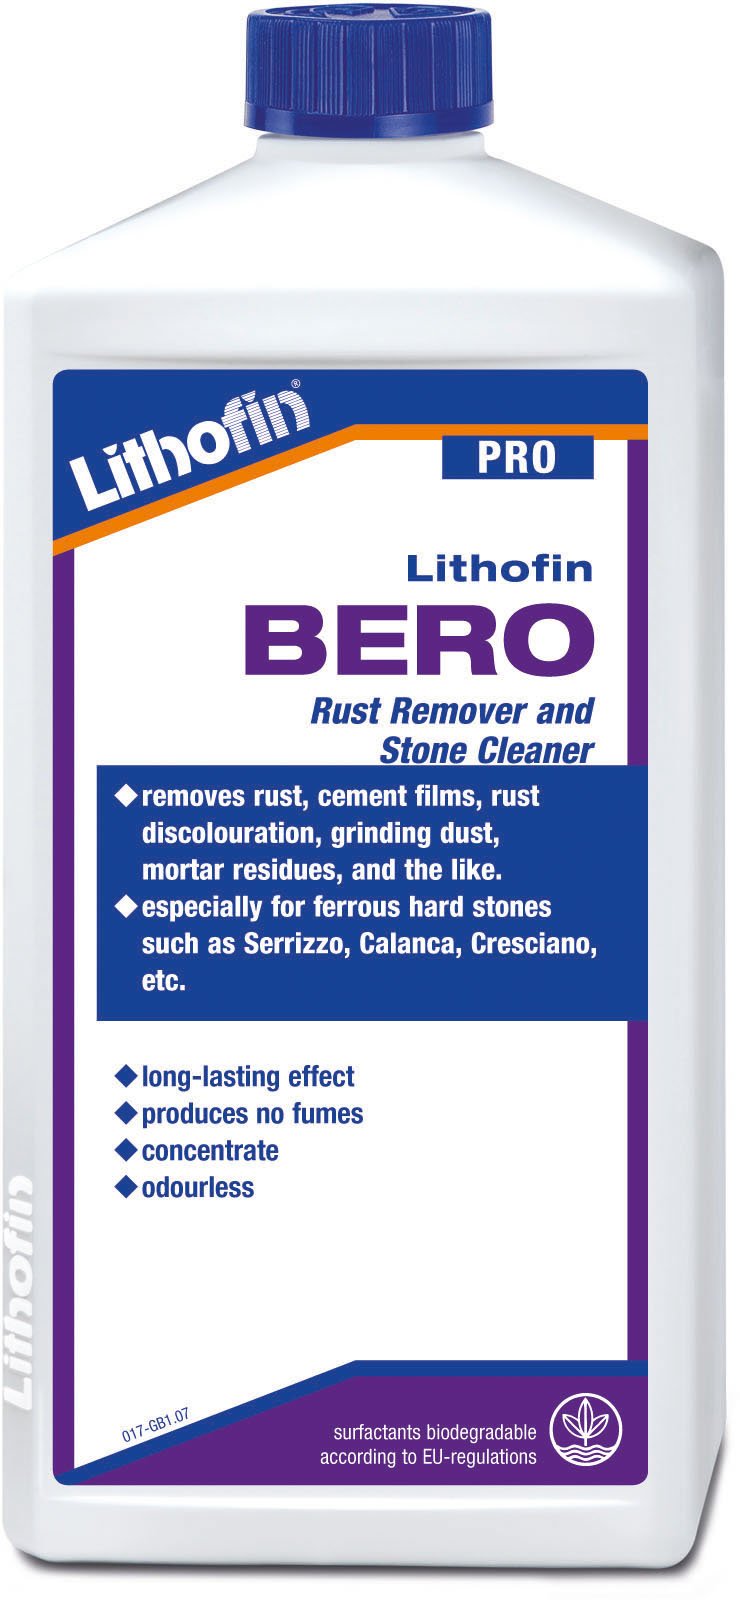 Lithofin BERO rust remover and stone cleaner